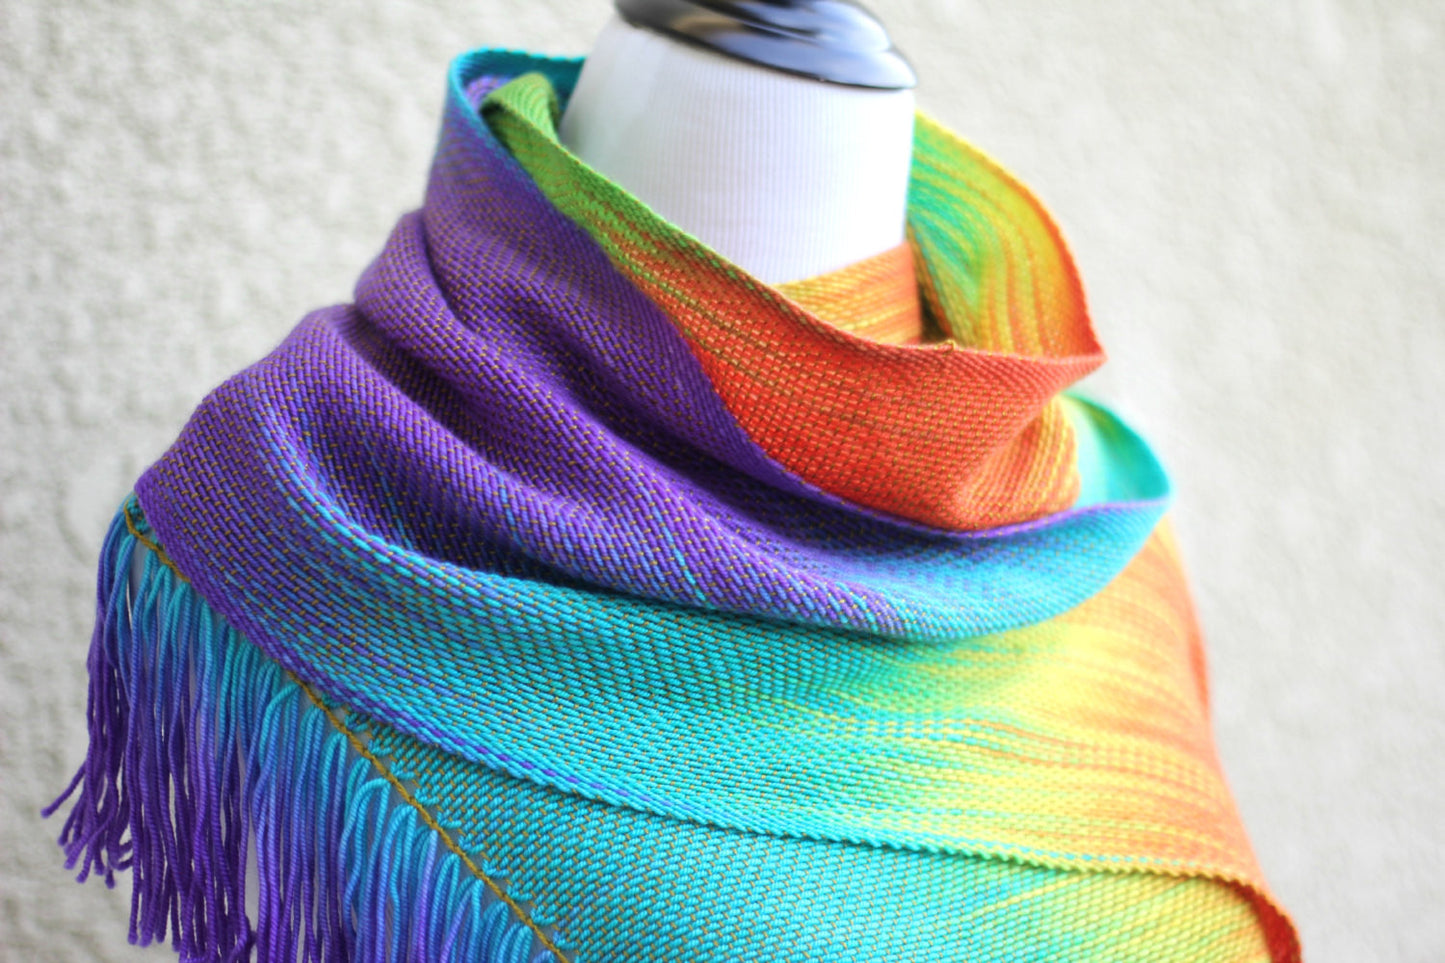 Woven rainbow scarf in red, green, yellow, turquoise and purple